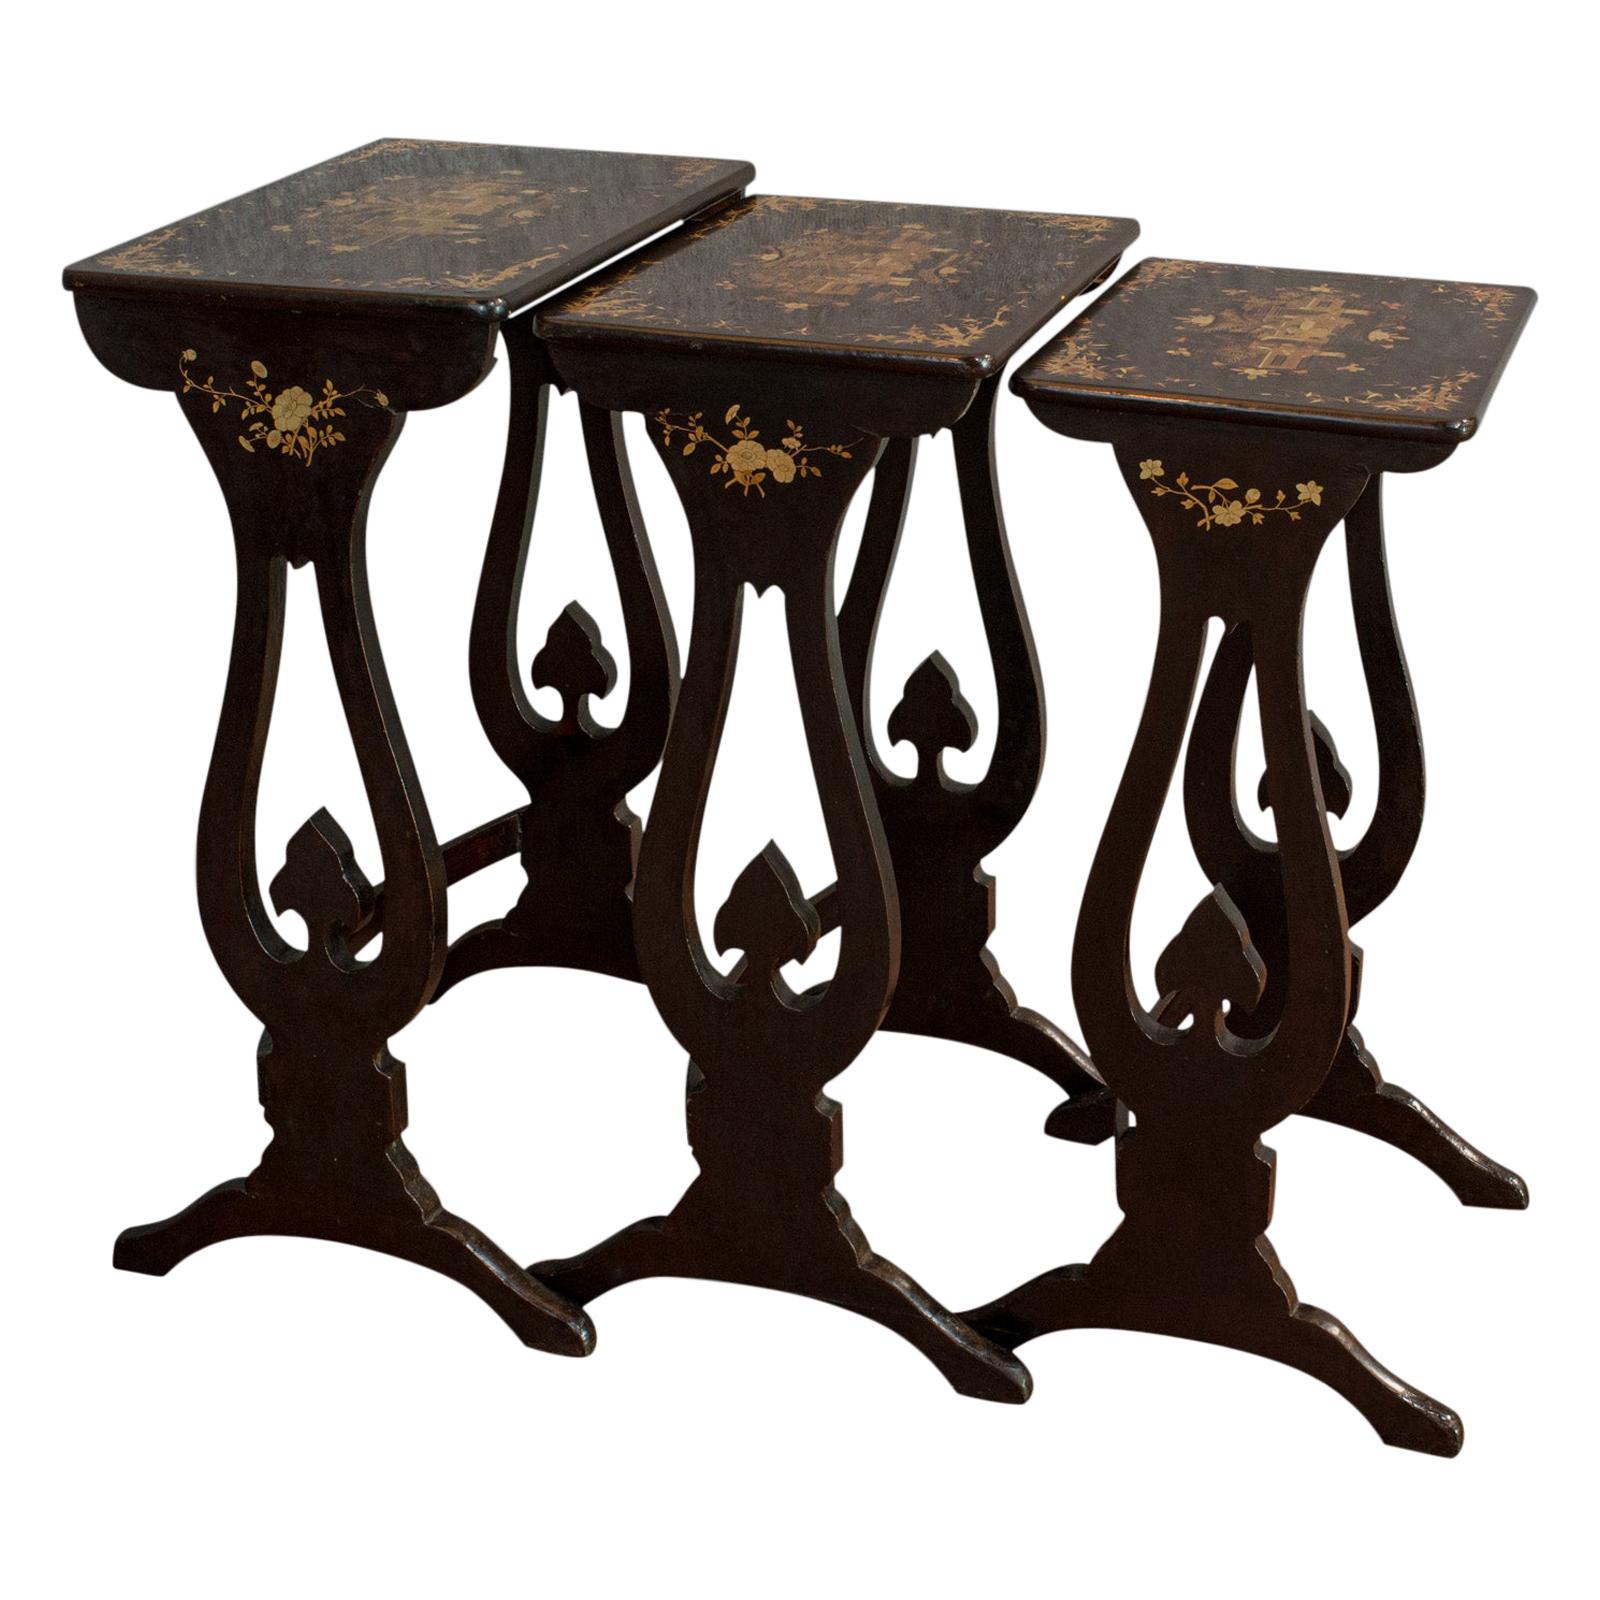 Antique Nest of Occasional Tables, Oriental Trio Japanned, Victorian, circa 1880